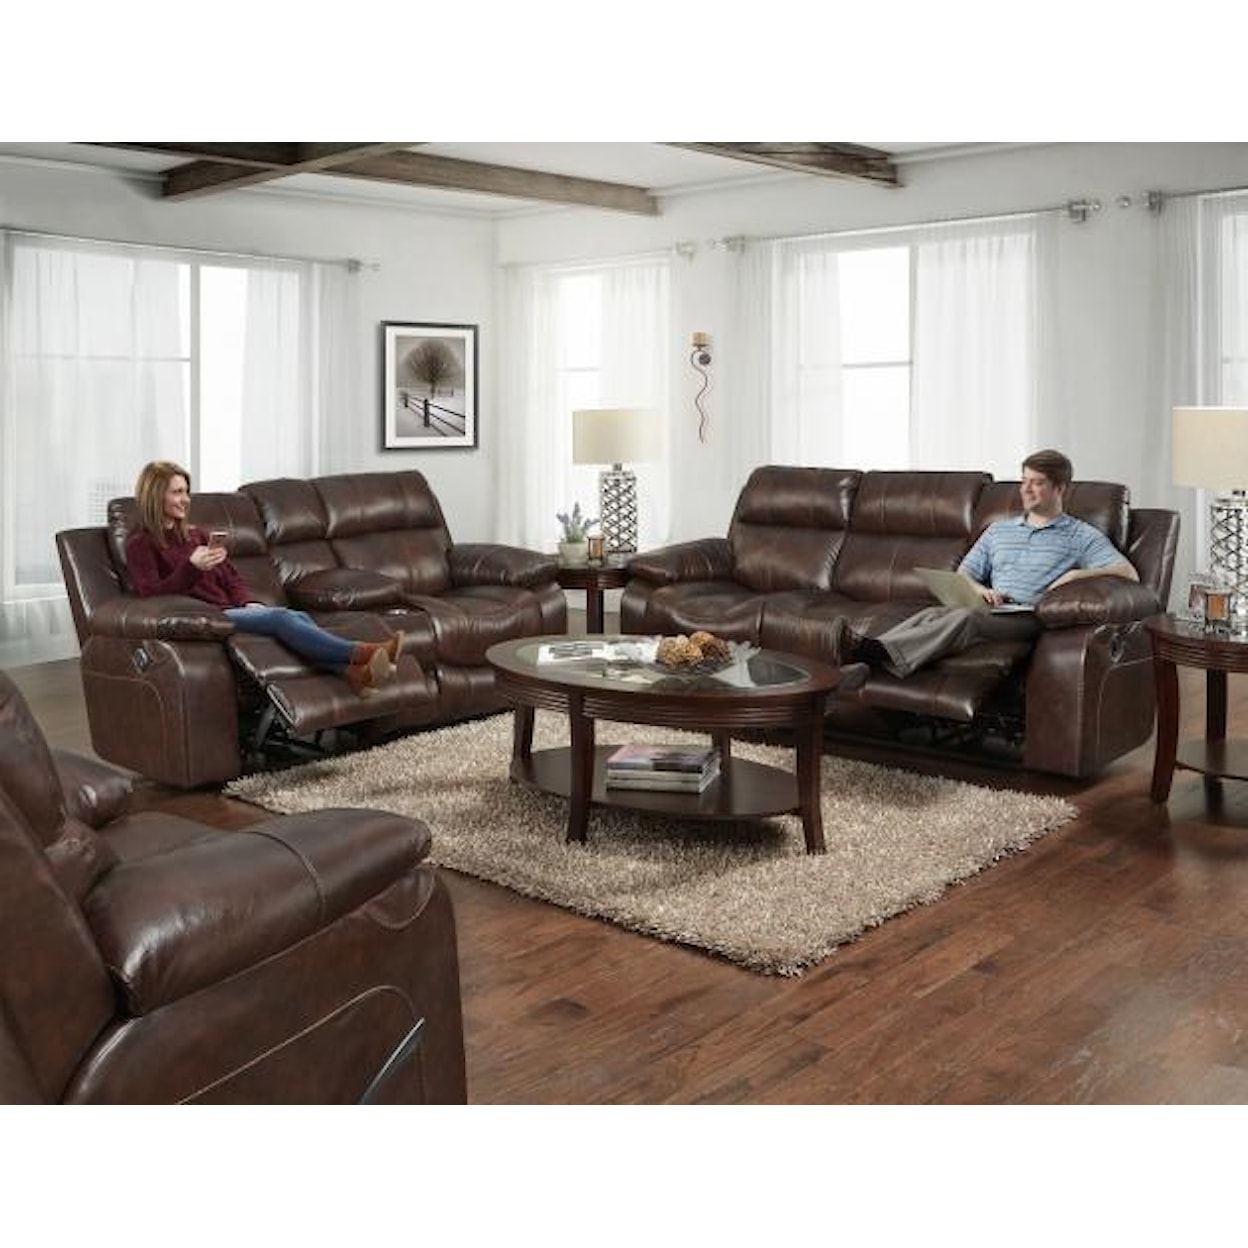 Catnapper 499 Power Leather Console Reclining loveseat